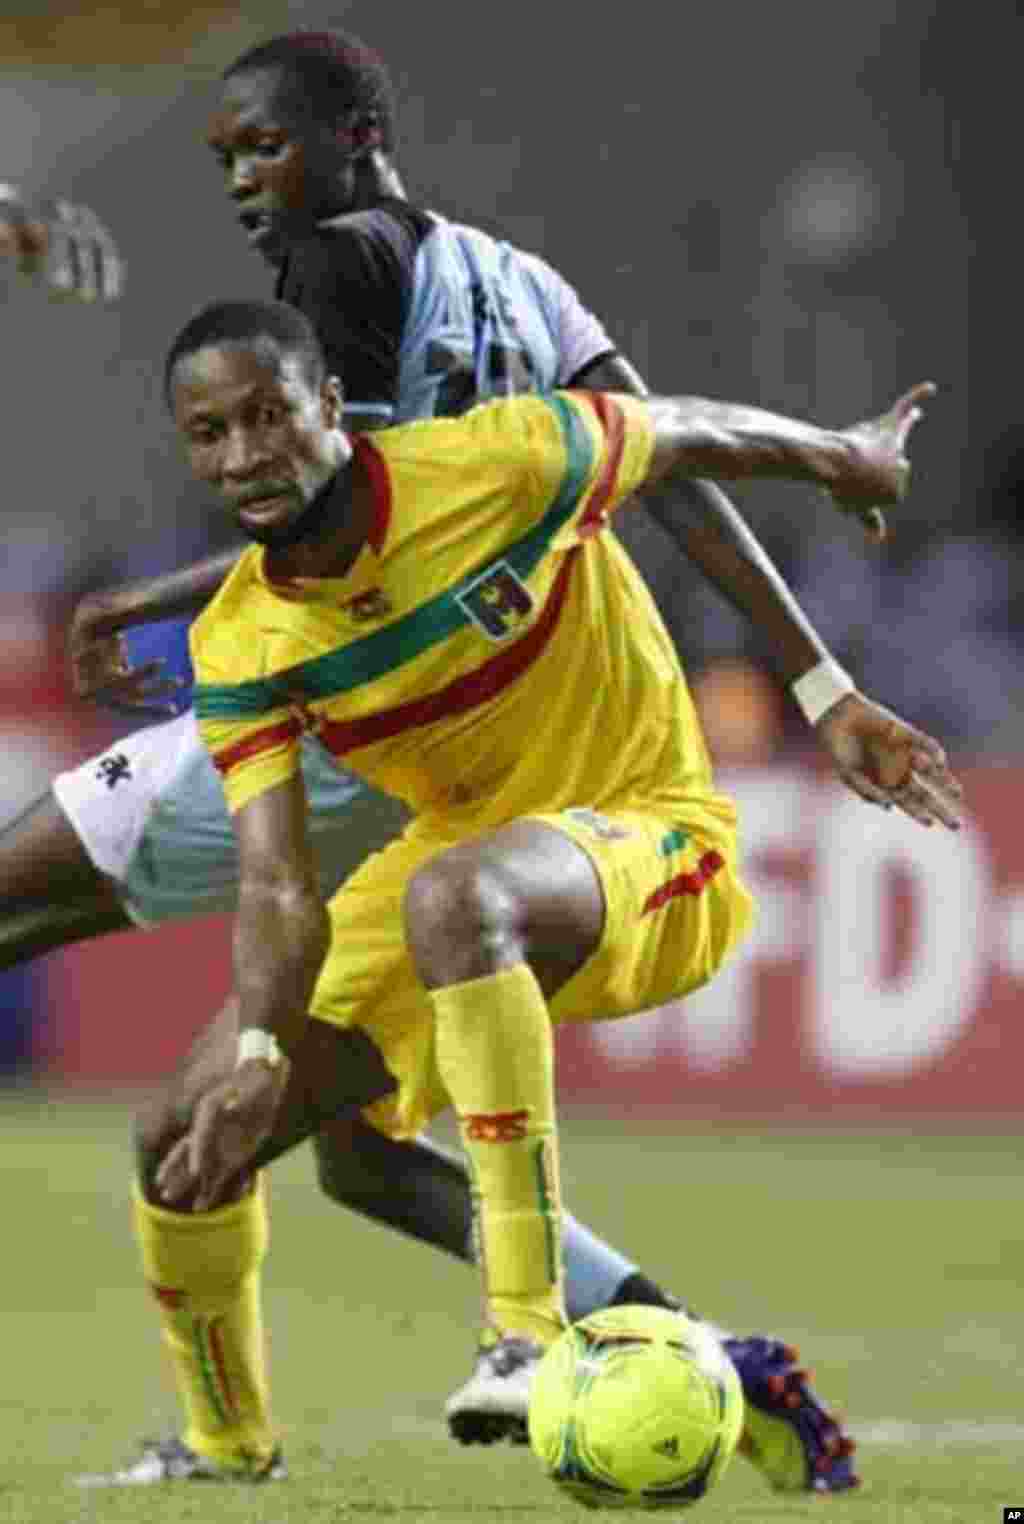 Mali's Seydou Keita (12) plays against Botswana's Mogakolodi Ngele during their final African Cup of Nations Group D soccer match at the Stade De L'Amitie Stadium in Libreville February 1, 2012.